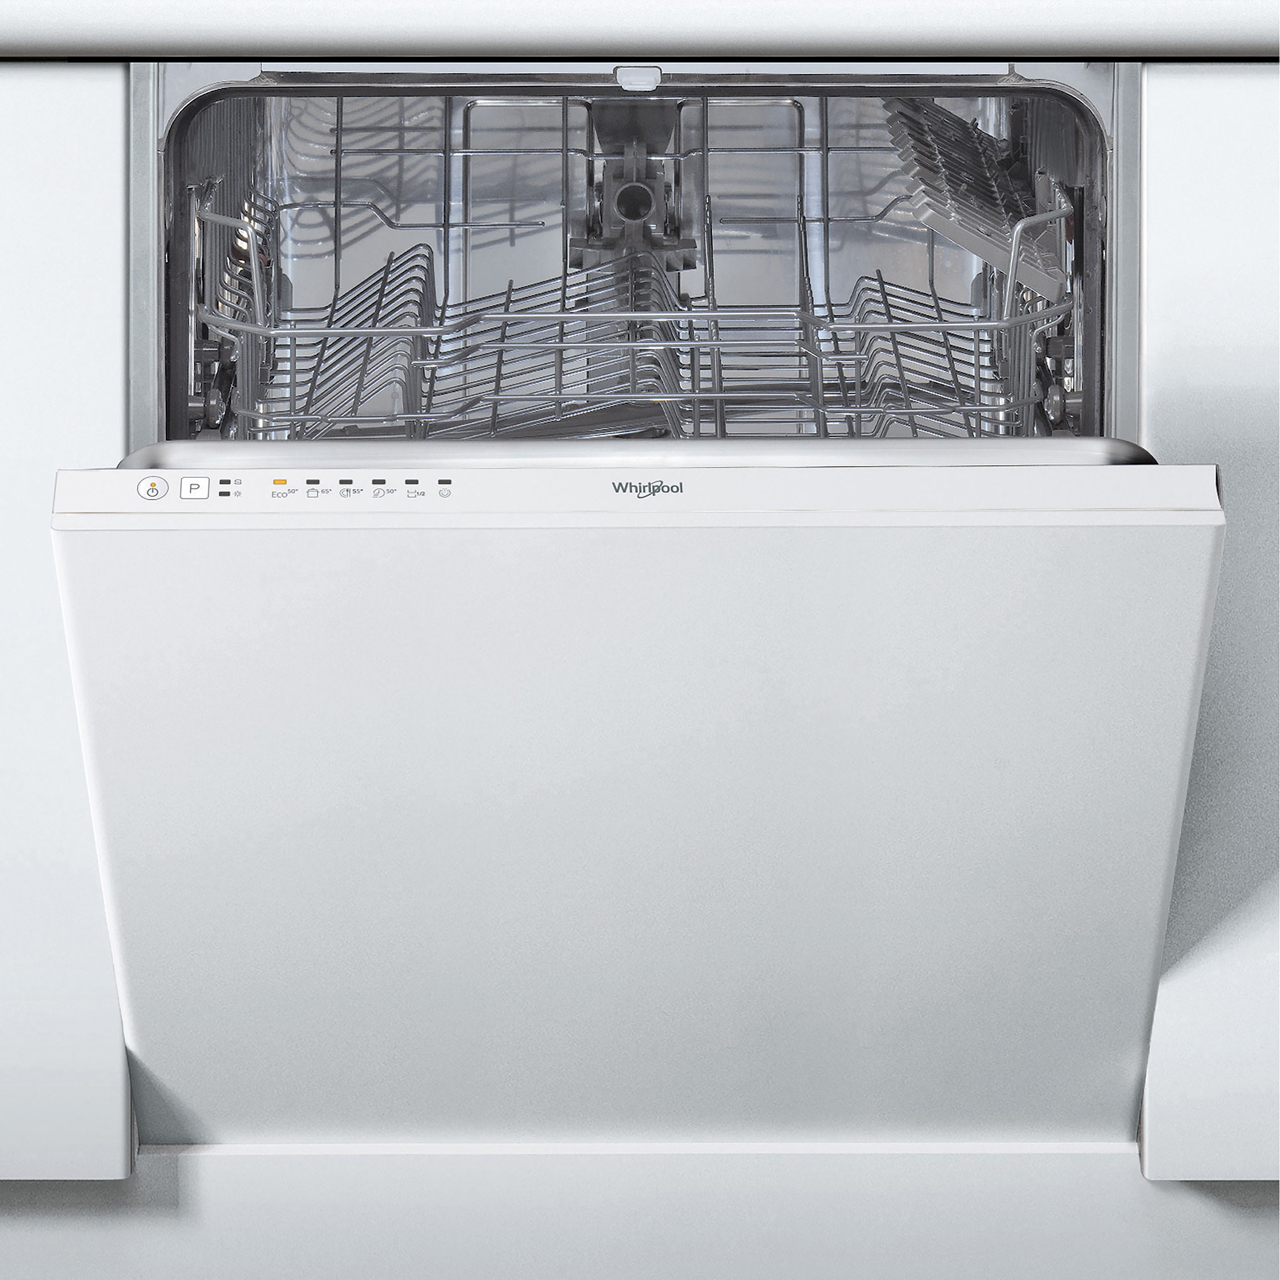 Whirlpool WIE2B19 Fully Integrated Standard Dishwasher Review